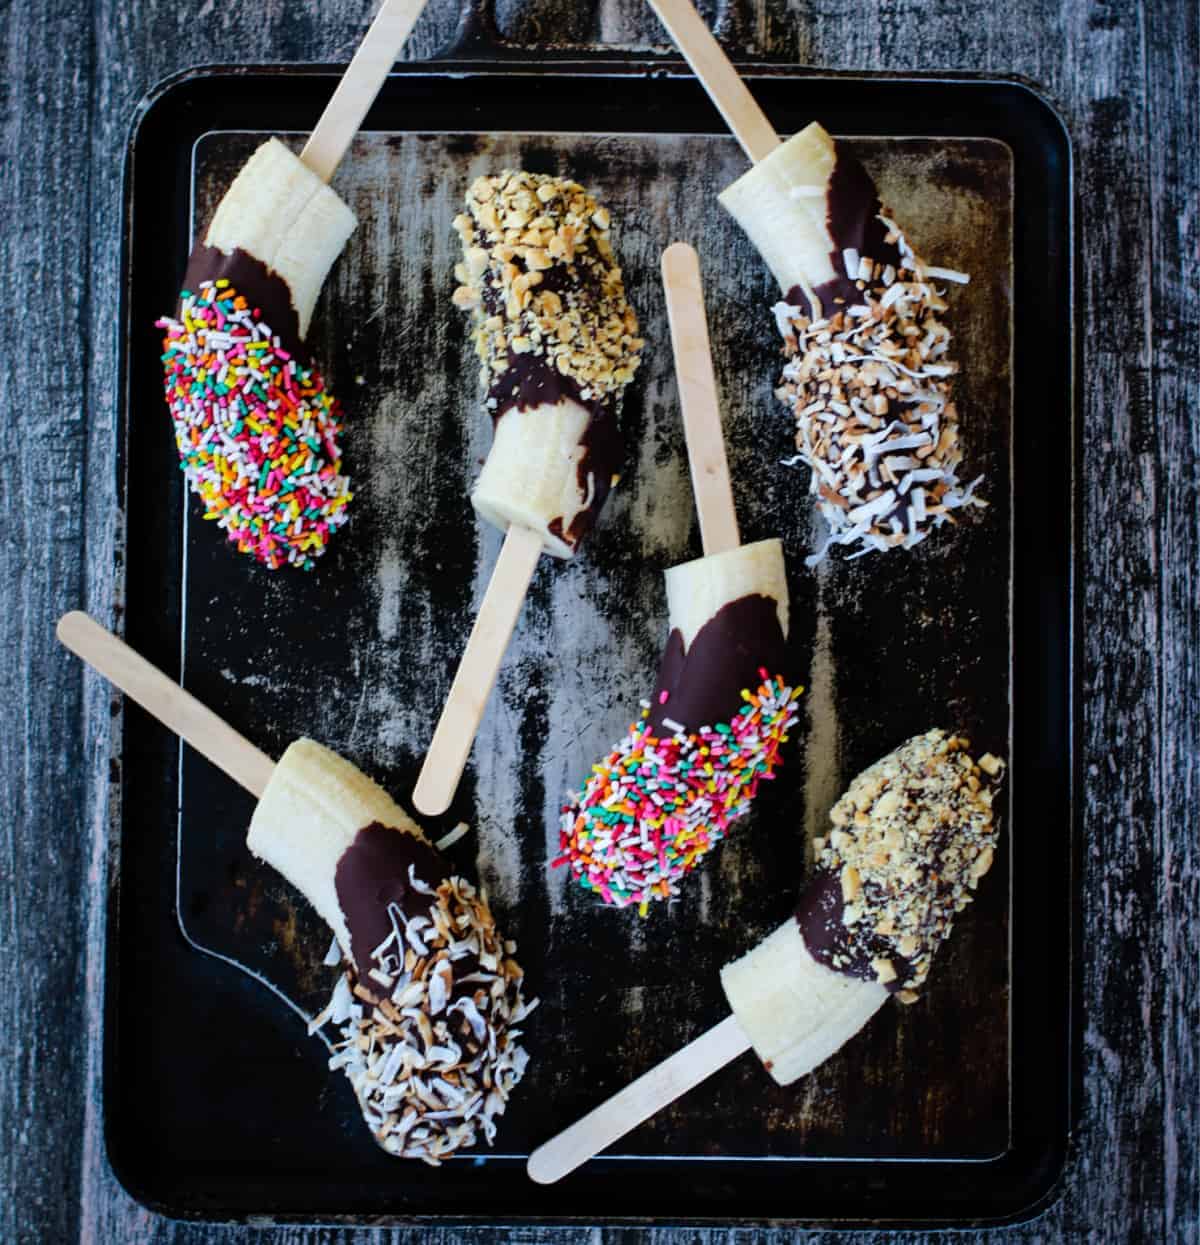 How to Make Easy Frozen Banana Popsicles | G-Free Foodie